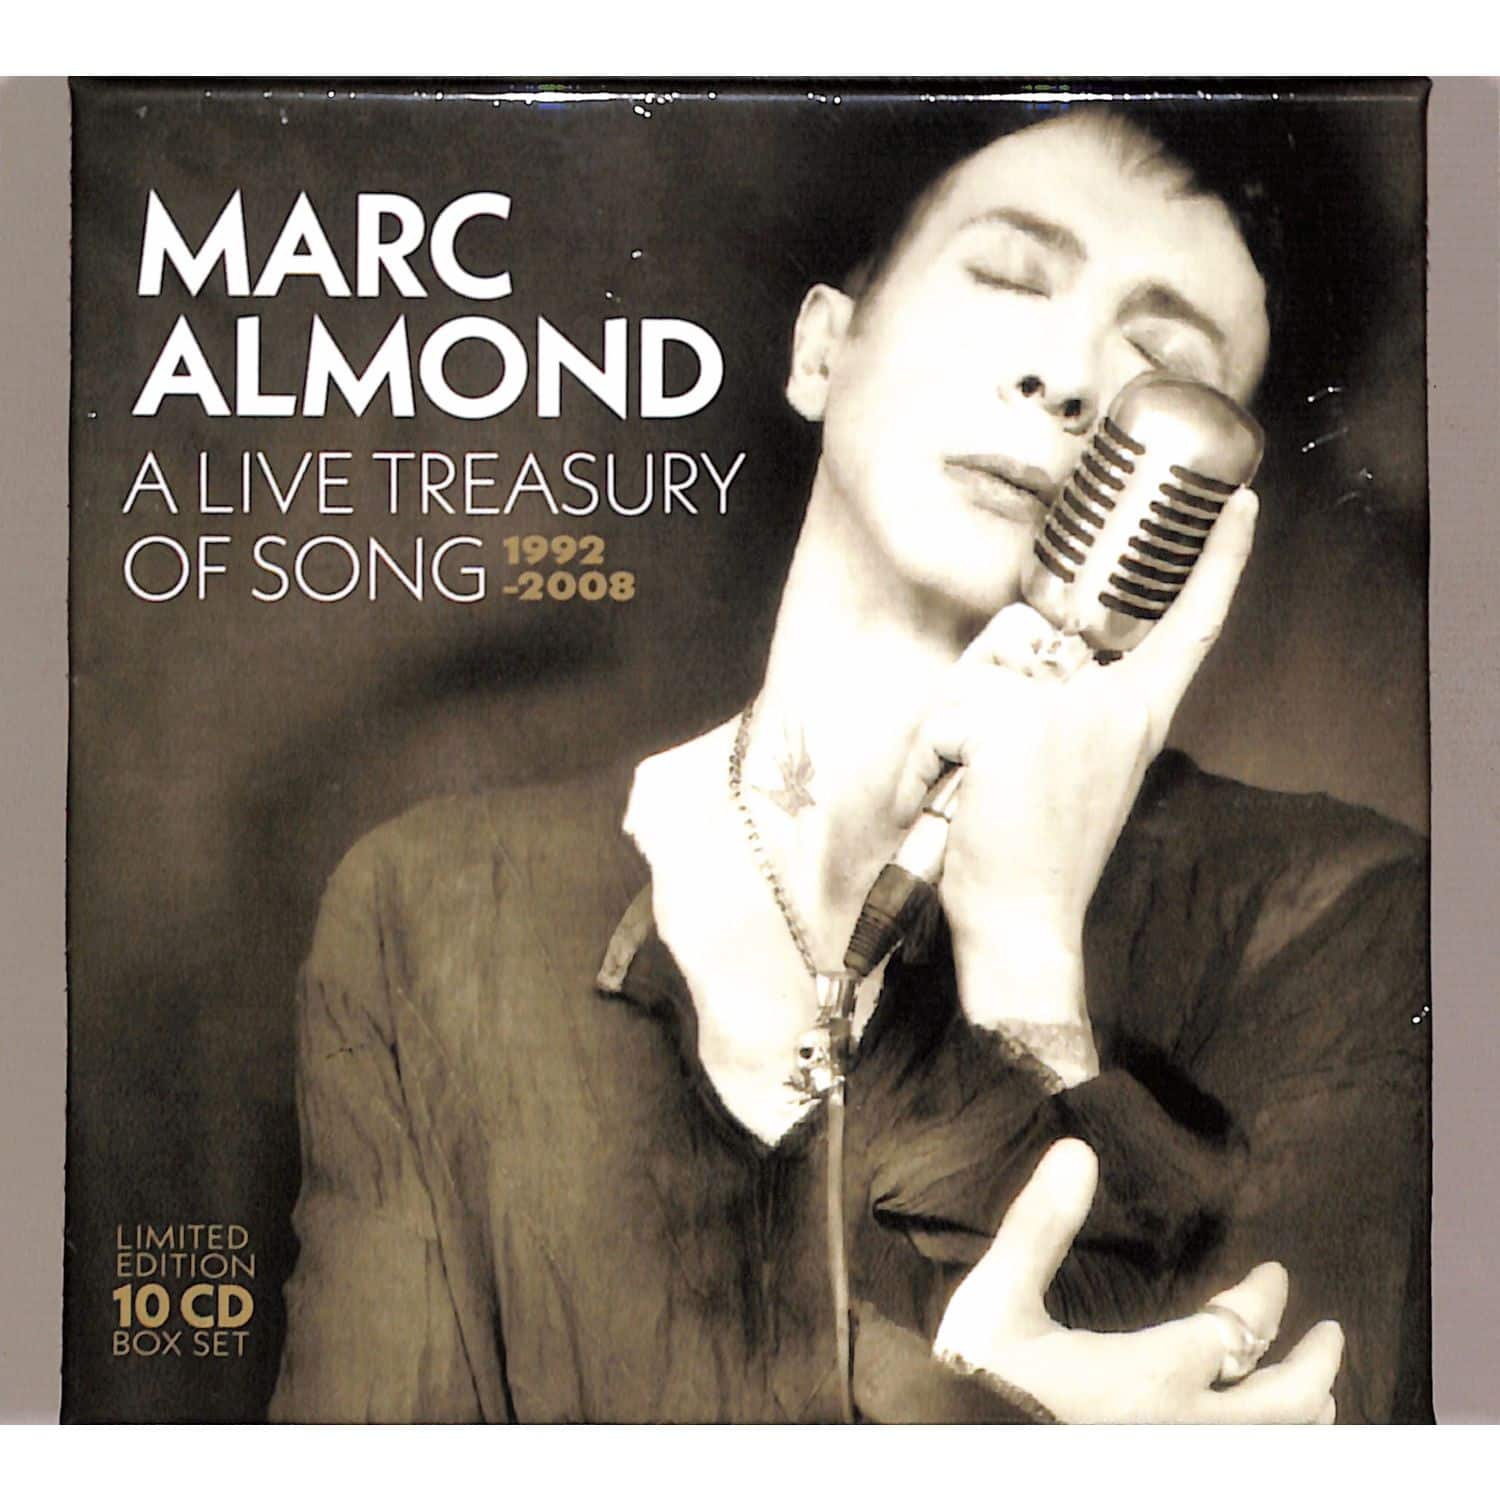 Marc Almond - A LIVE TREASURY OF SONG 1992-2008 